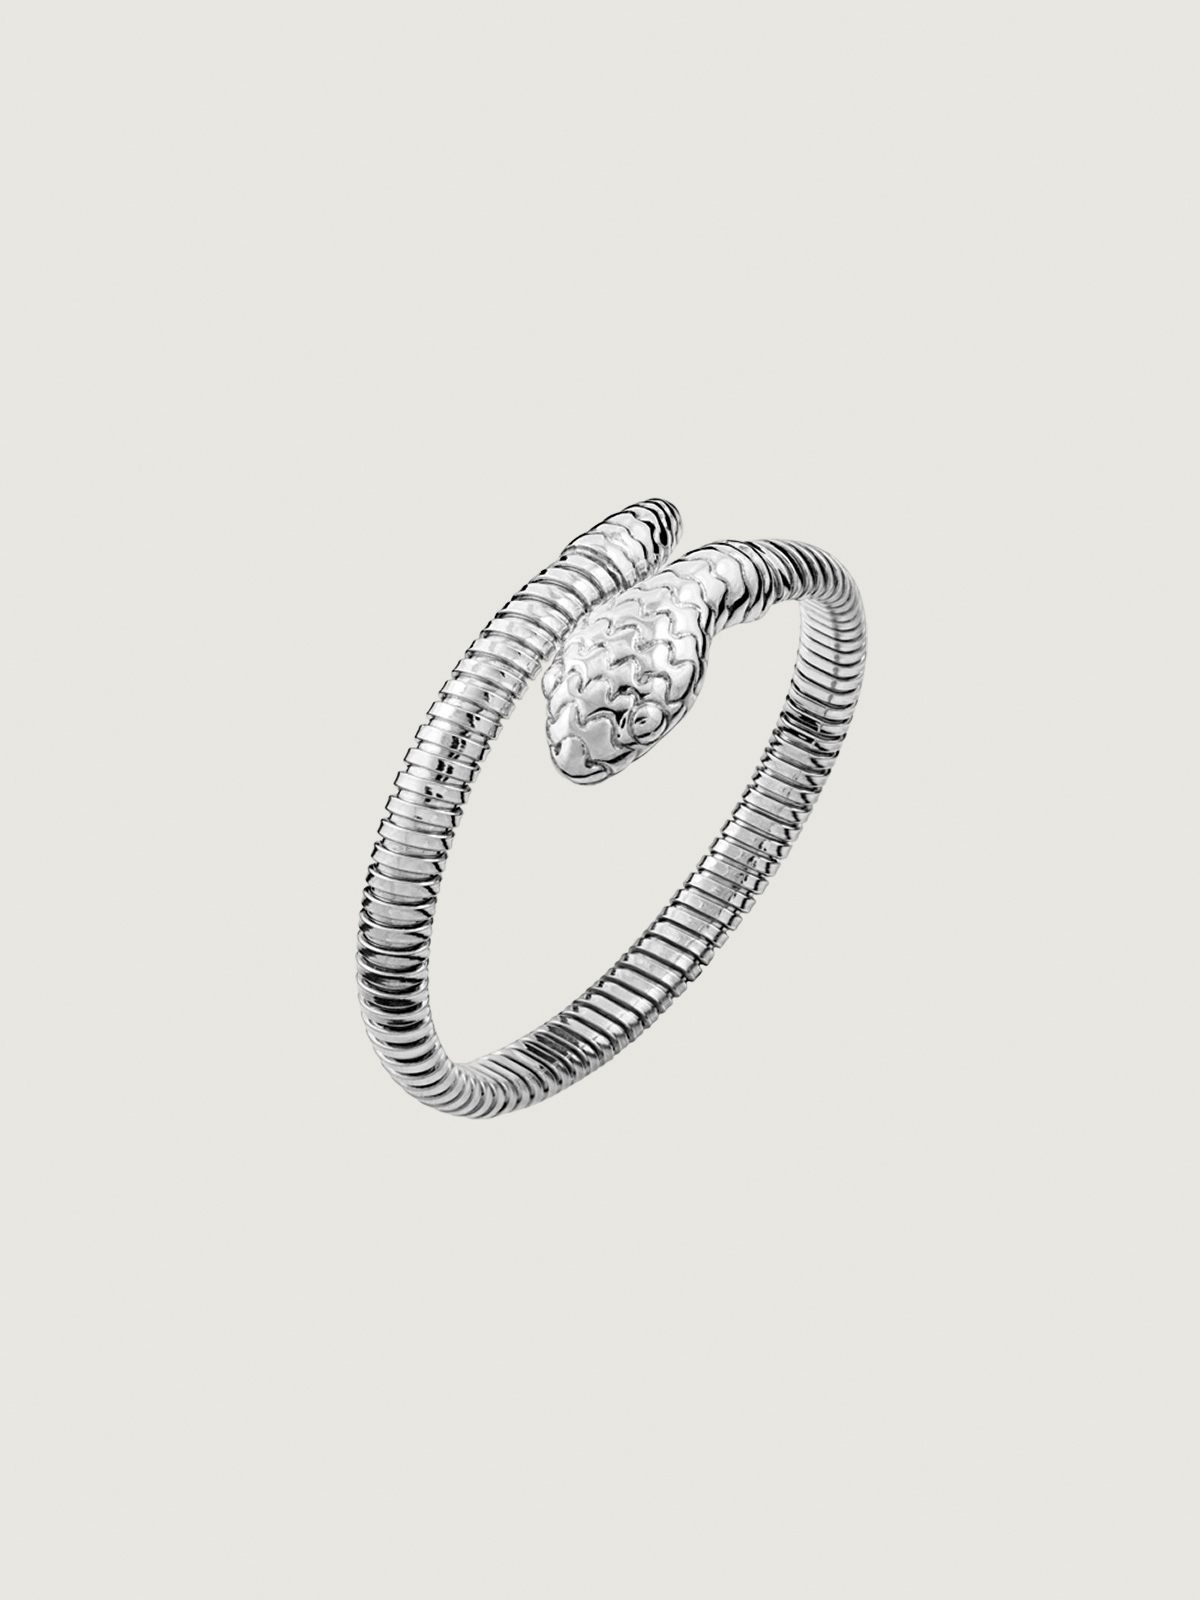 Rigid bracelet made of 925 silver in the shape of a snake.